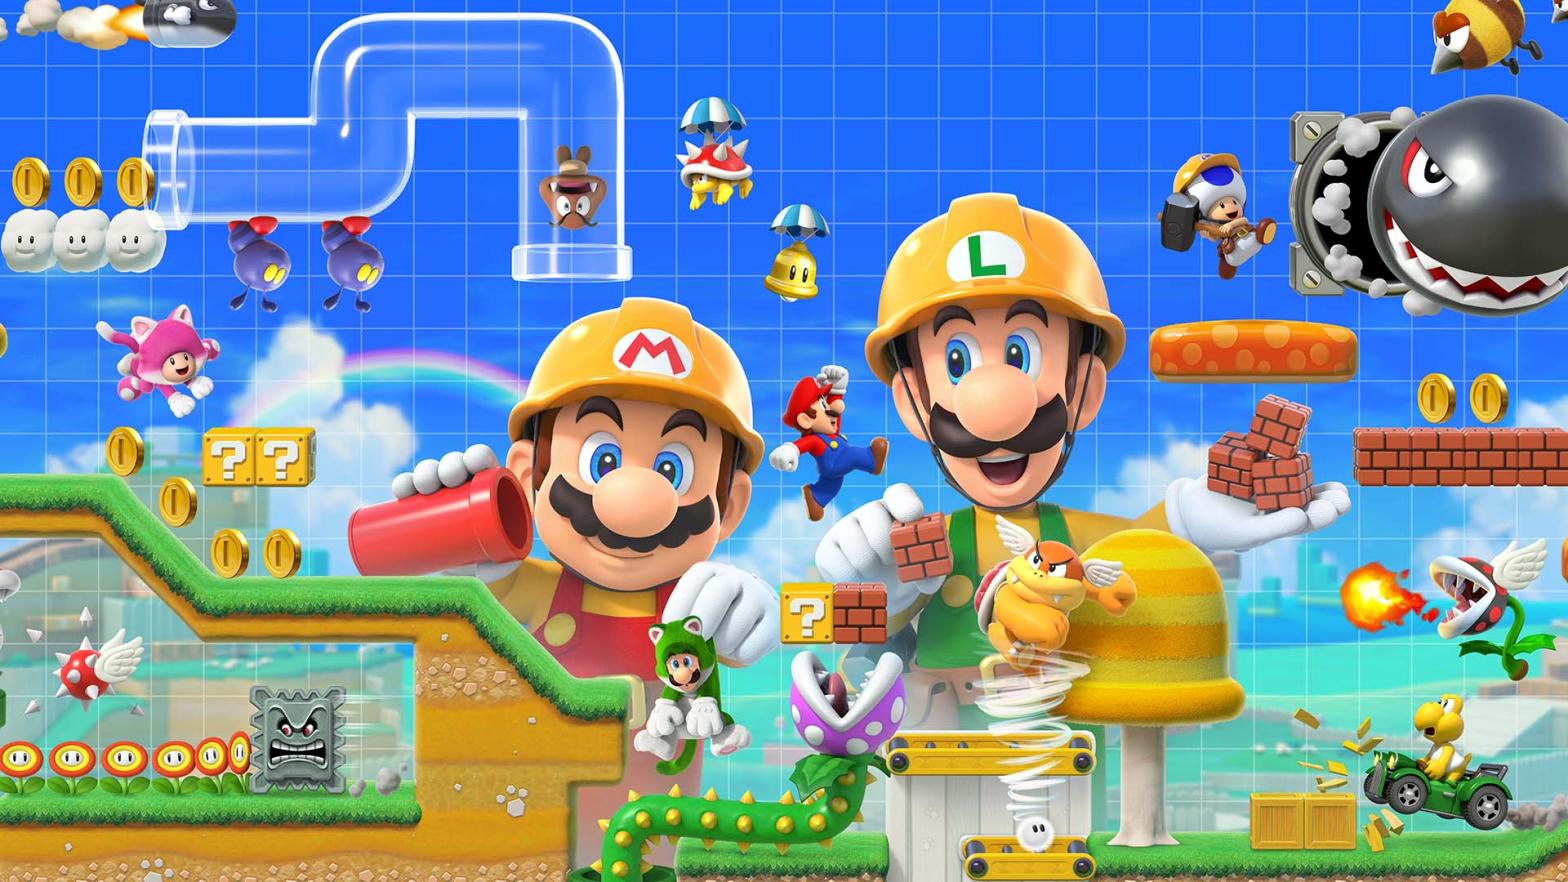 A relay race in Super Mario Maker 2 is one of this weekend's events to watch. (Image: Nintendo)